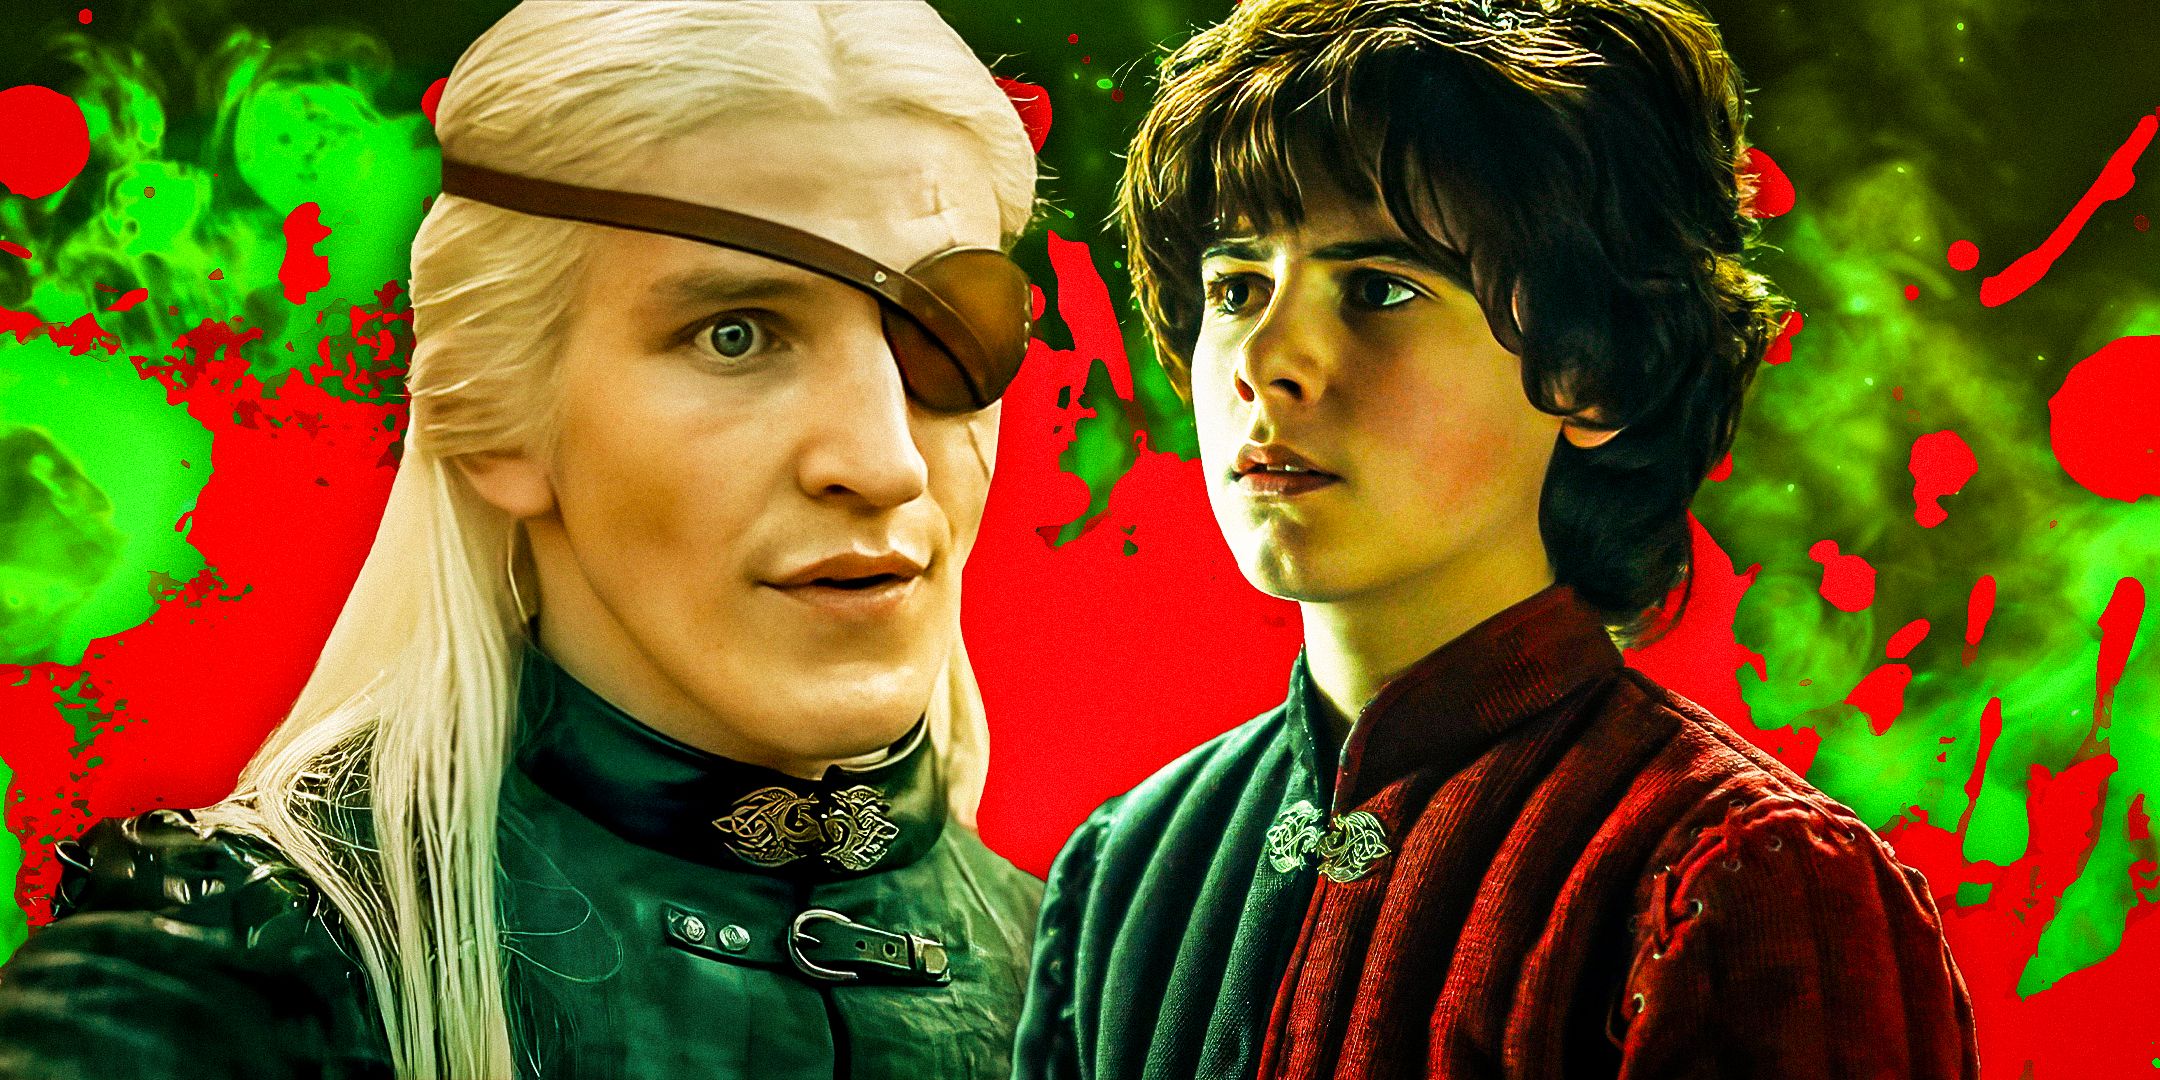 Ewan Mitchell as Aemond Targaryen and Elliot Grihault as Lucerys Velaryon in House of the Dragon with a green and red background